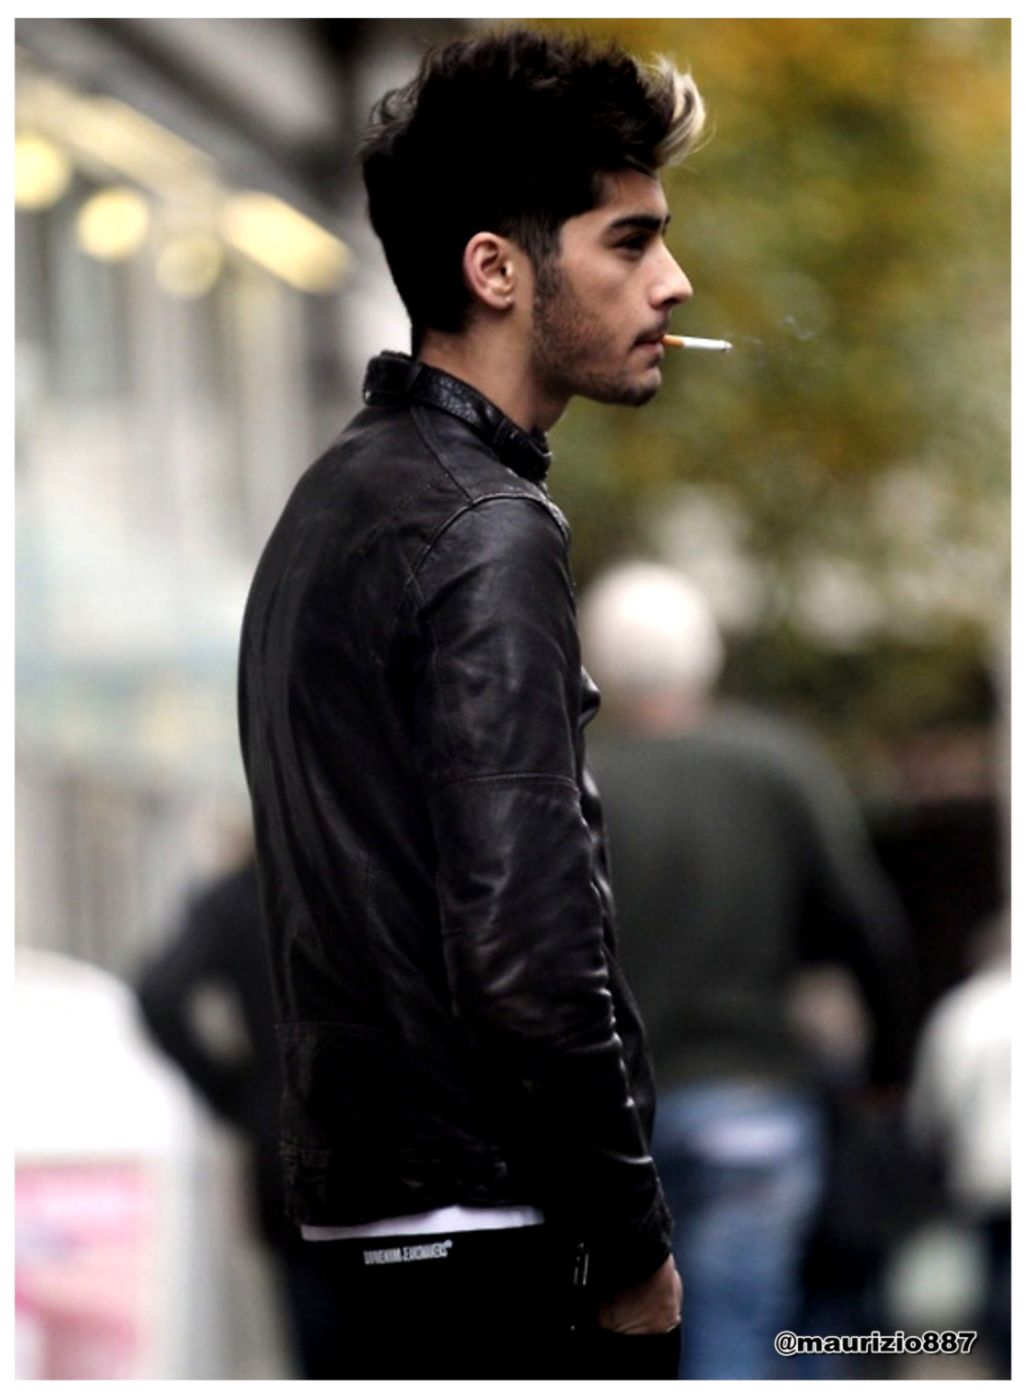 Search Results For One Direction Hd Pic Dresing Zayn - One Direction Zayn Malik (1026x1400)